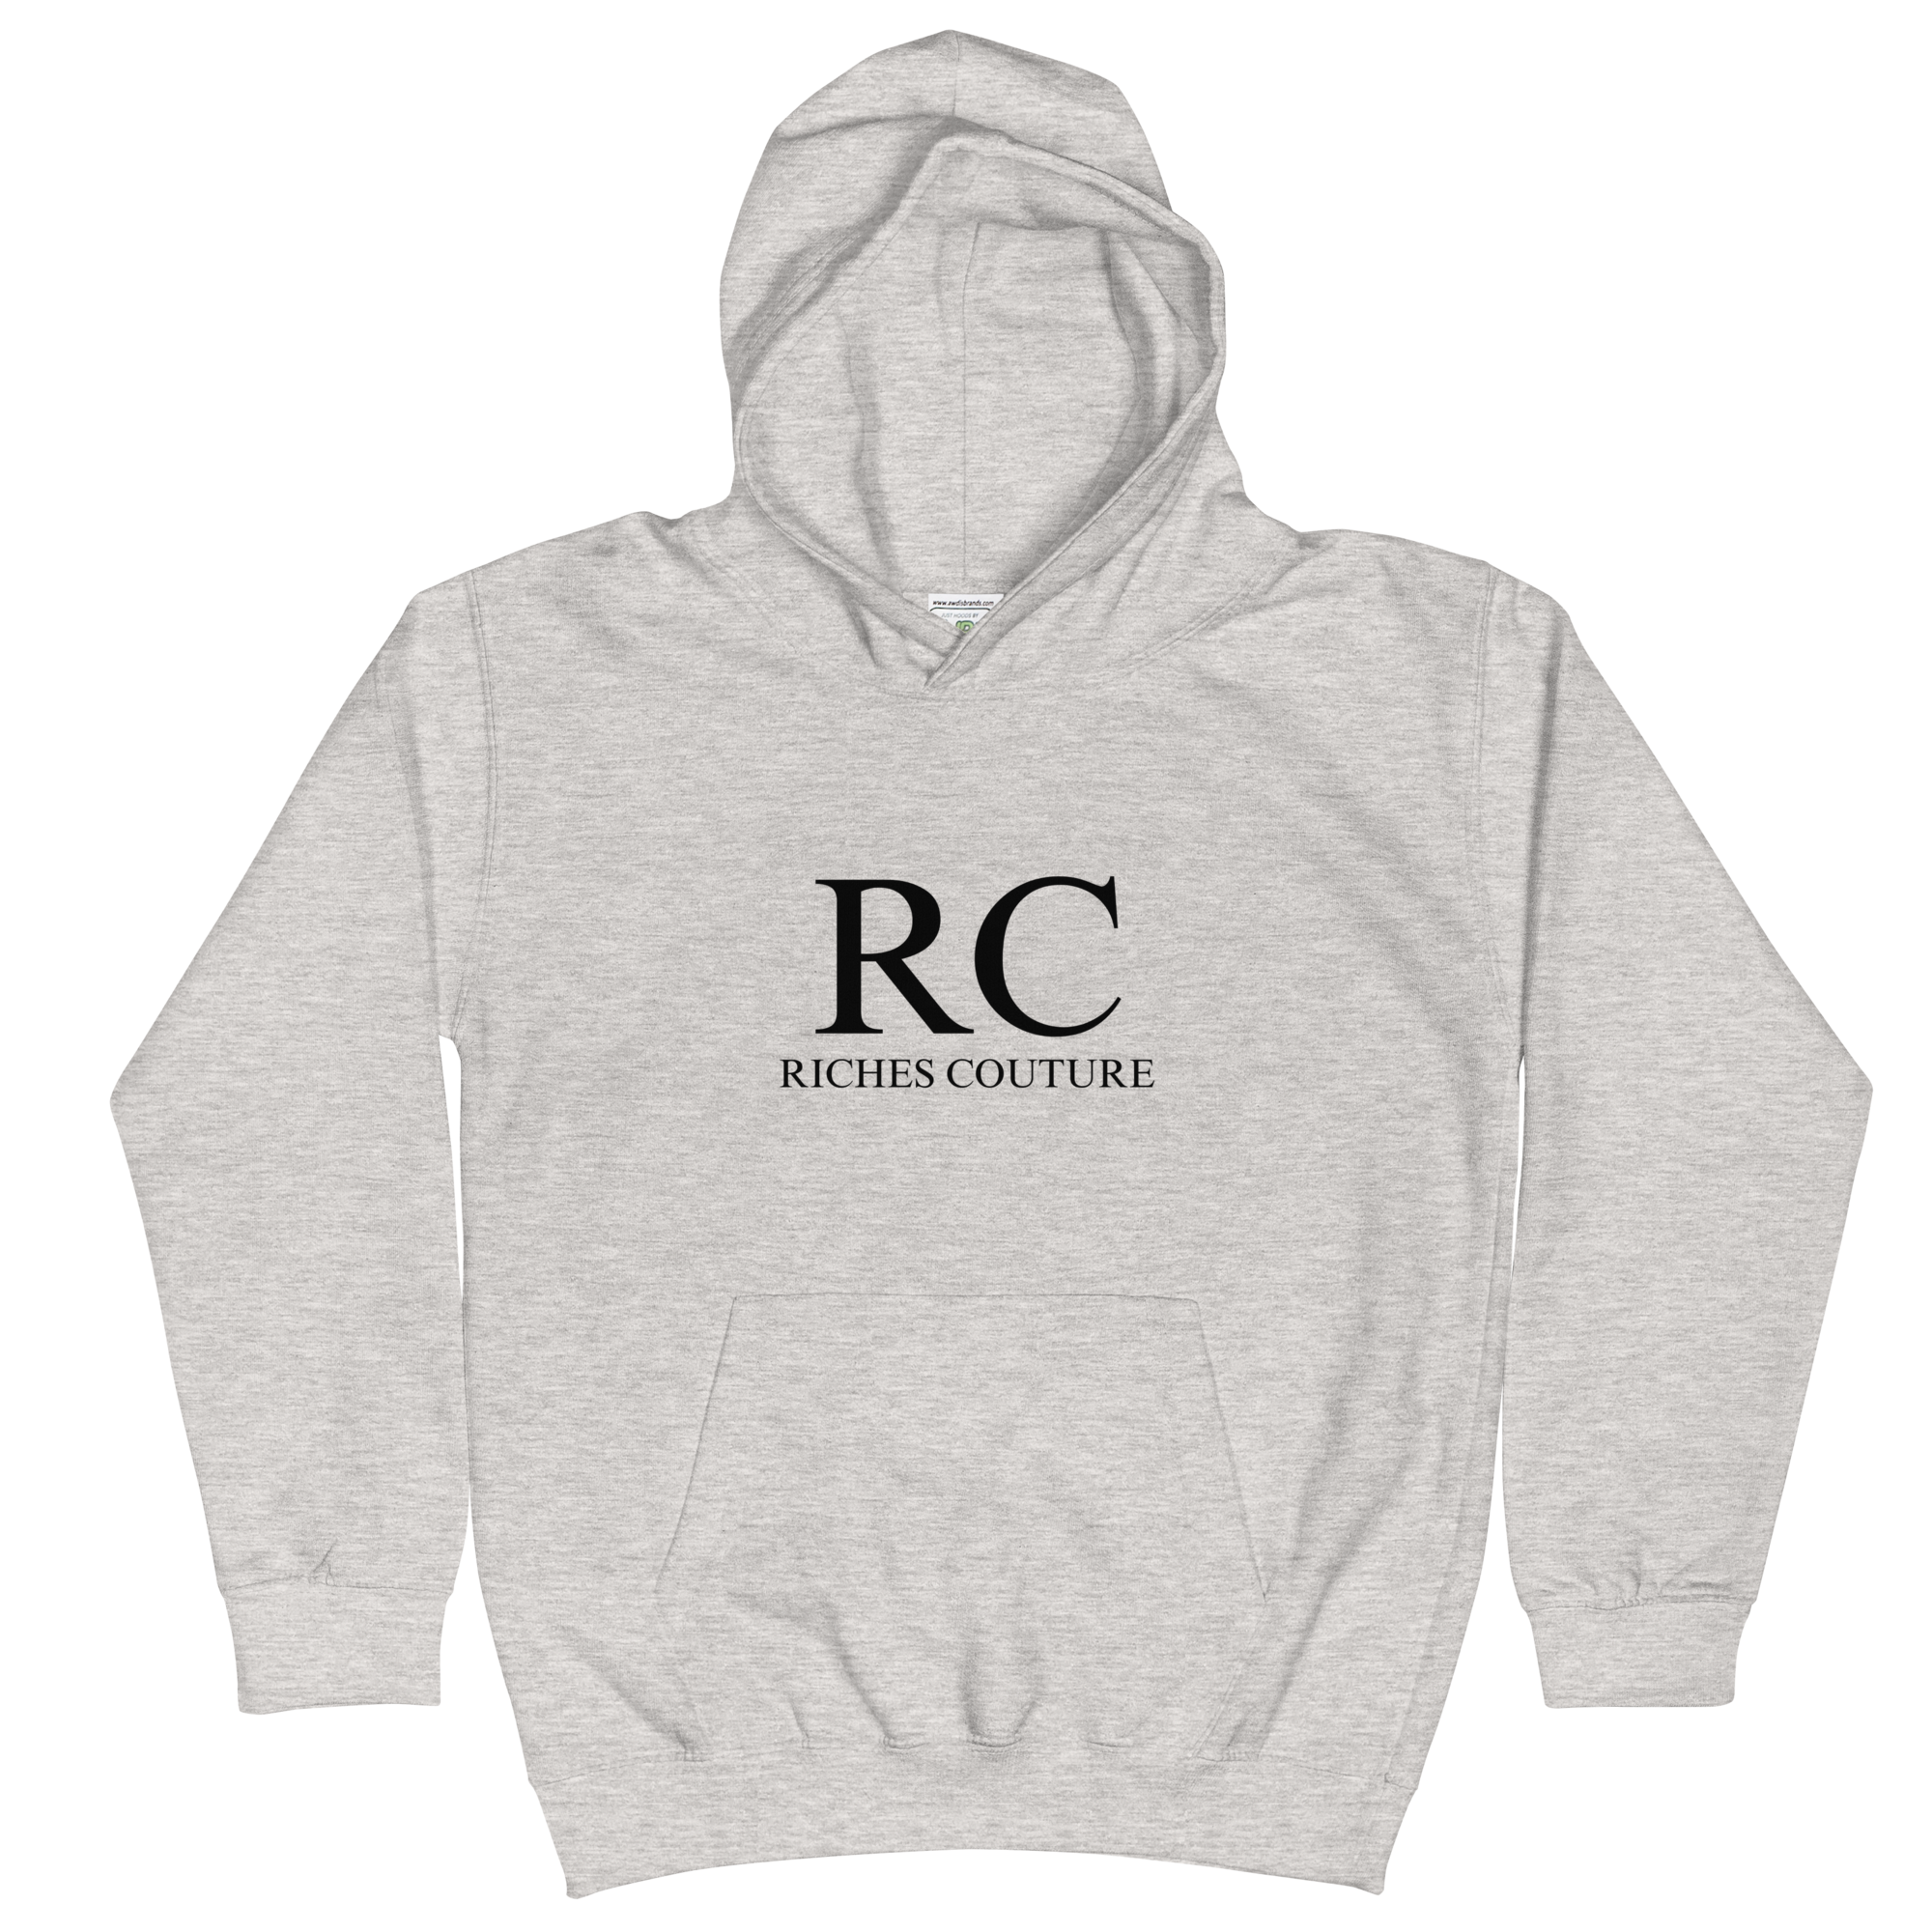 Riches Couture Boys Comfort hoodie light grey 